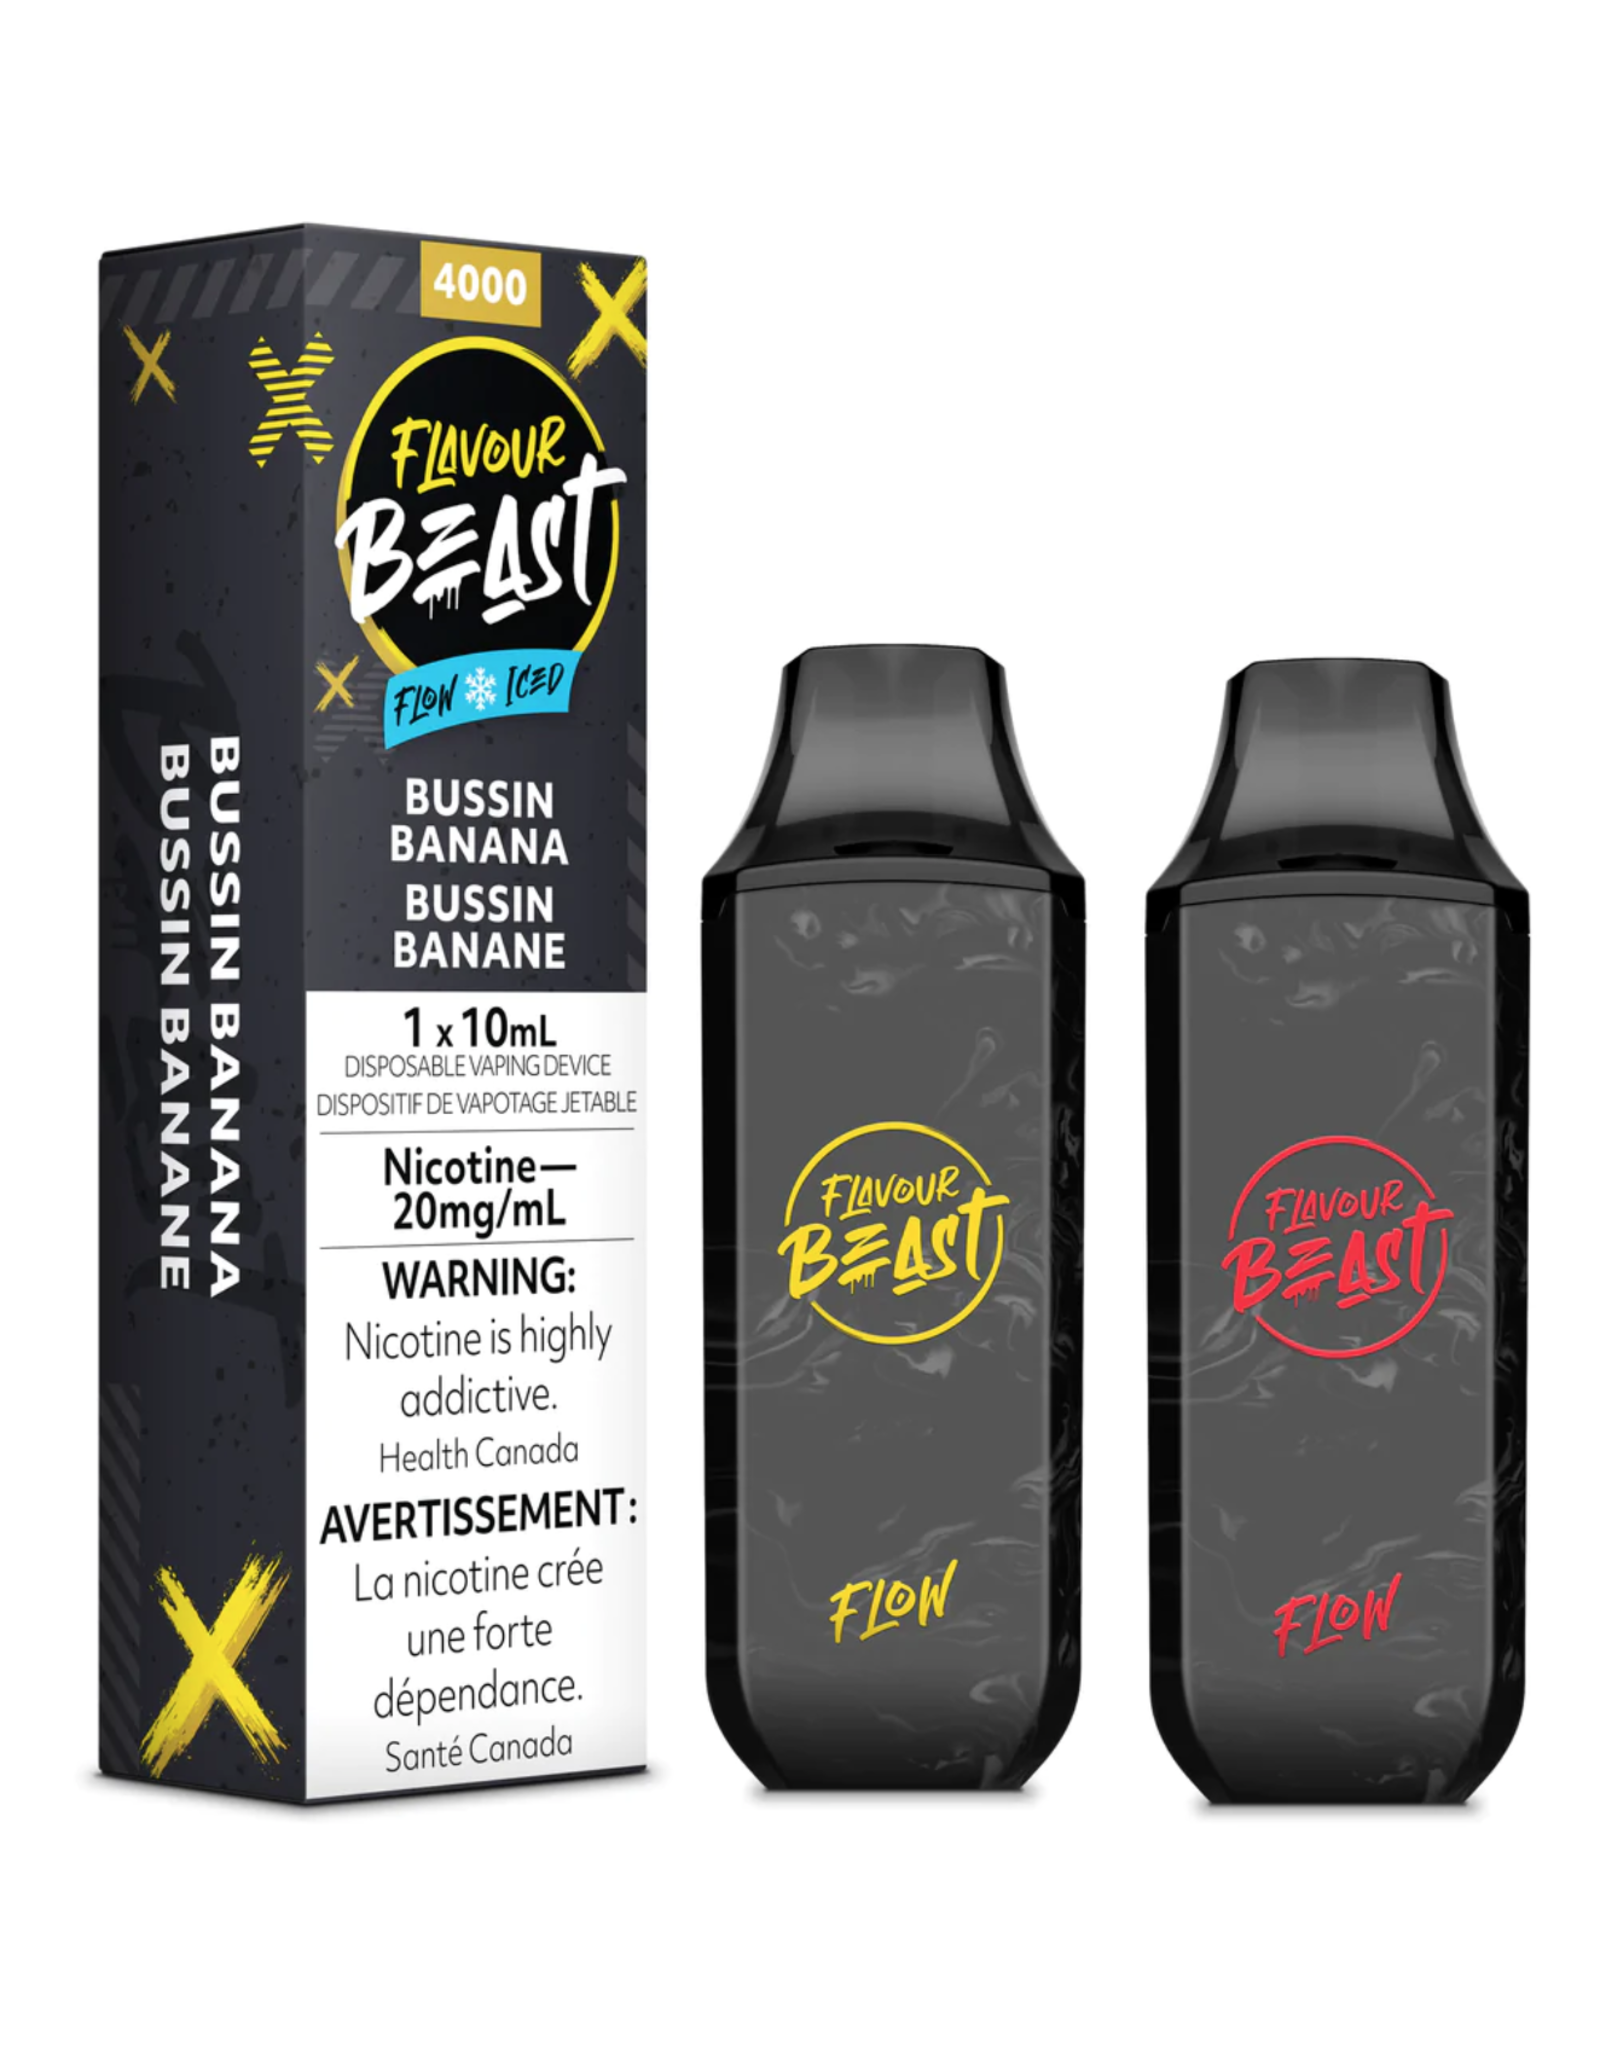 FLAVOUR BEAST FLAVOUR BEAST